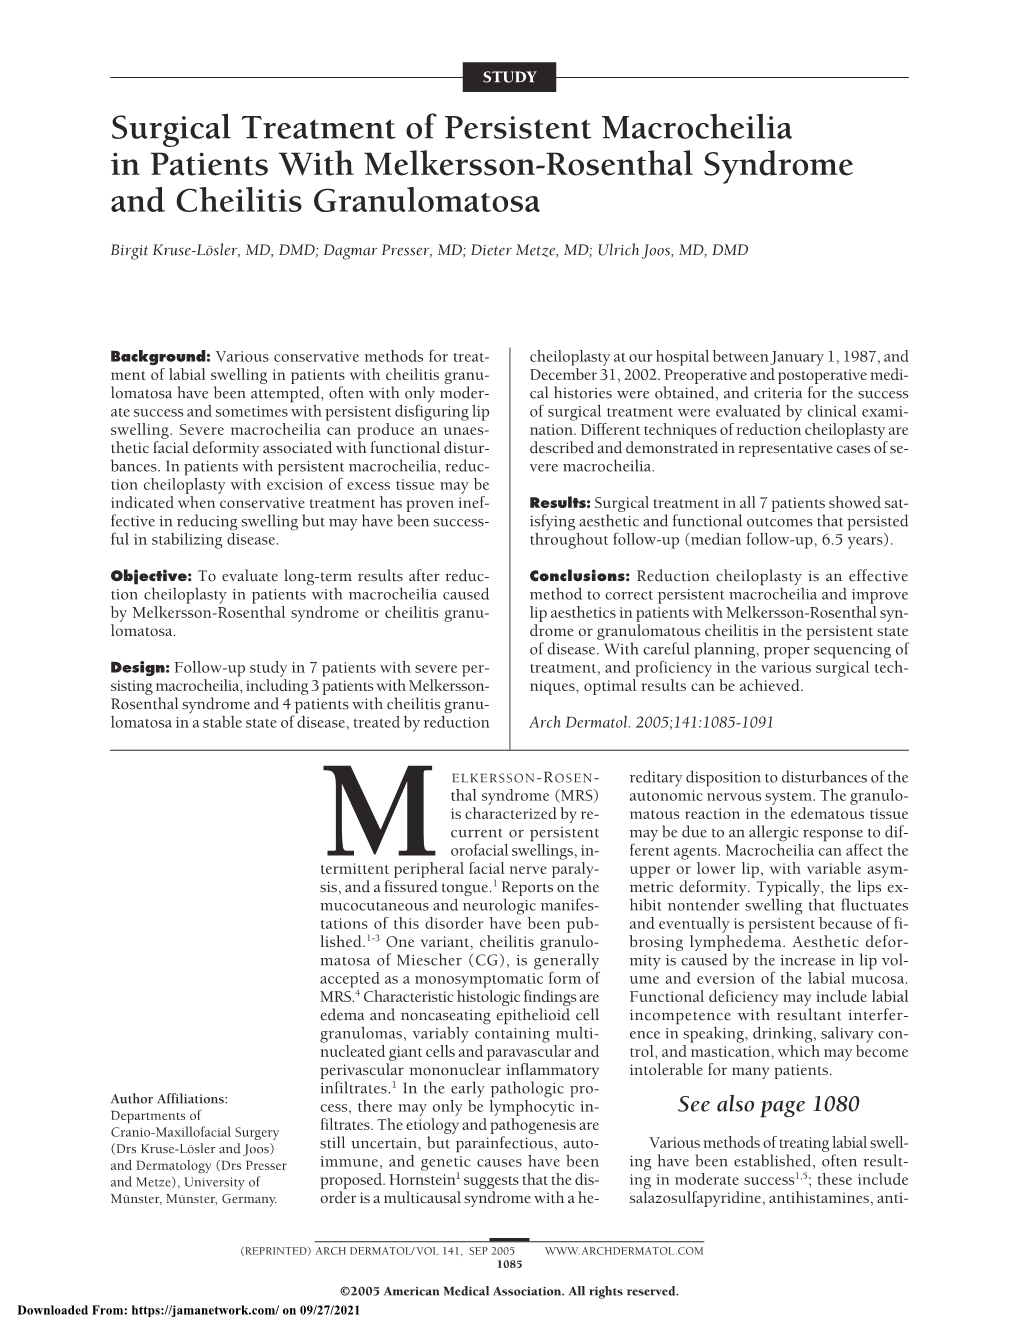 Surgical Treatment of Persistent Macrocheilia in Patients with Melkersson-Rosenthal Syndrome and Cheilitis Granulomatosa